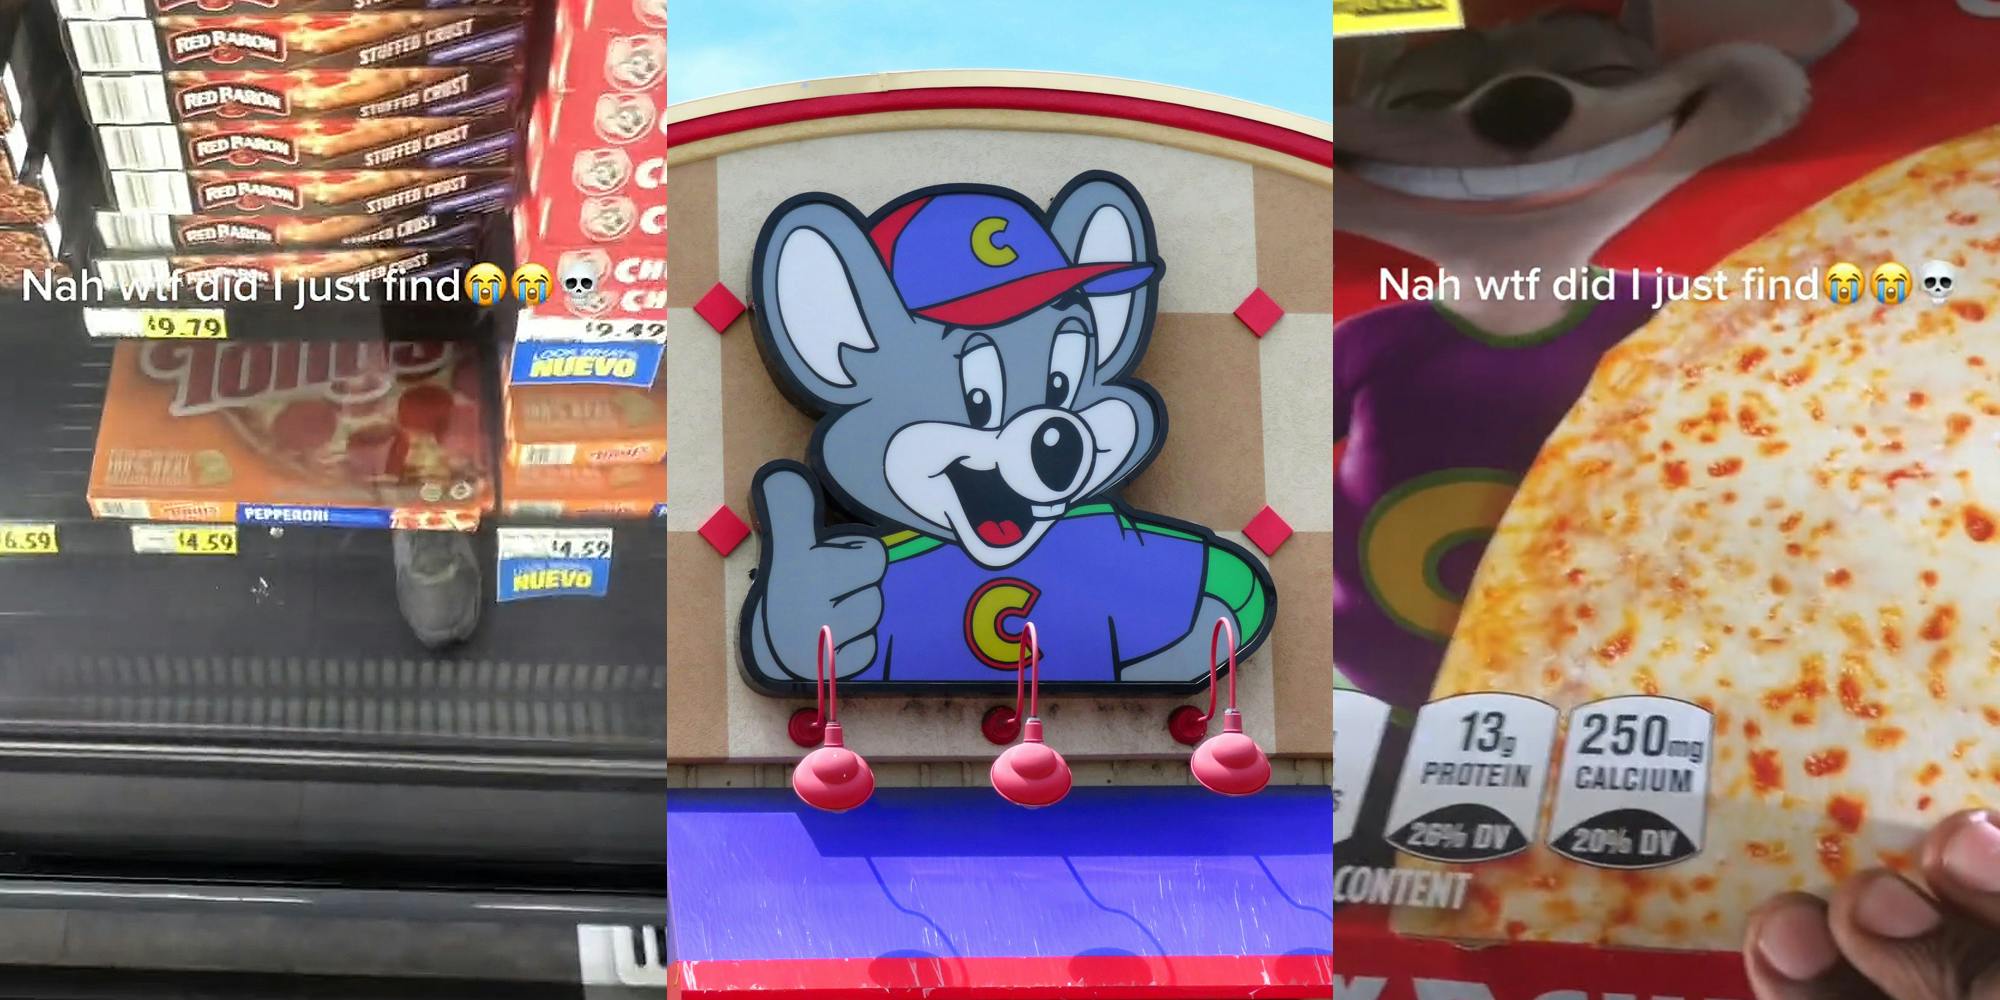 Grocery store fridge pizza section caption "Nah wtf did I just find" (l) Chuck E Cheese building with sign of mascot (c) Man pulling Chuck E Cheese pizza from grocery store fridge (r)